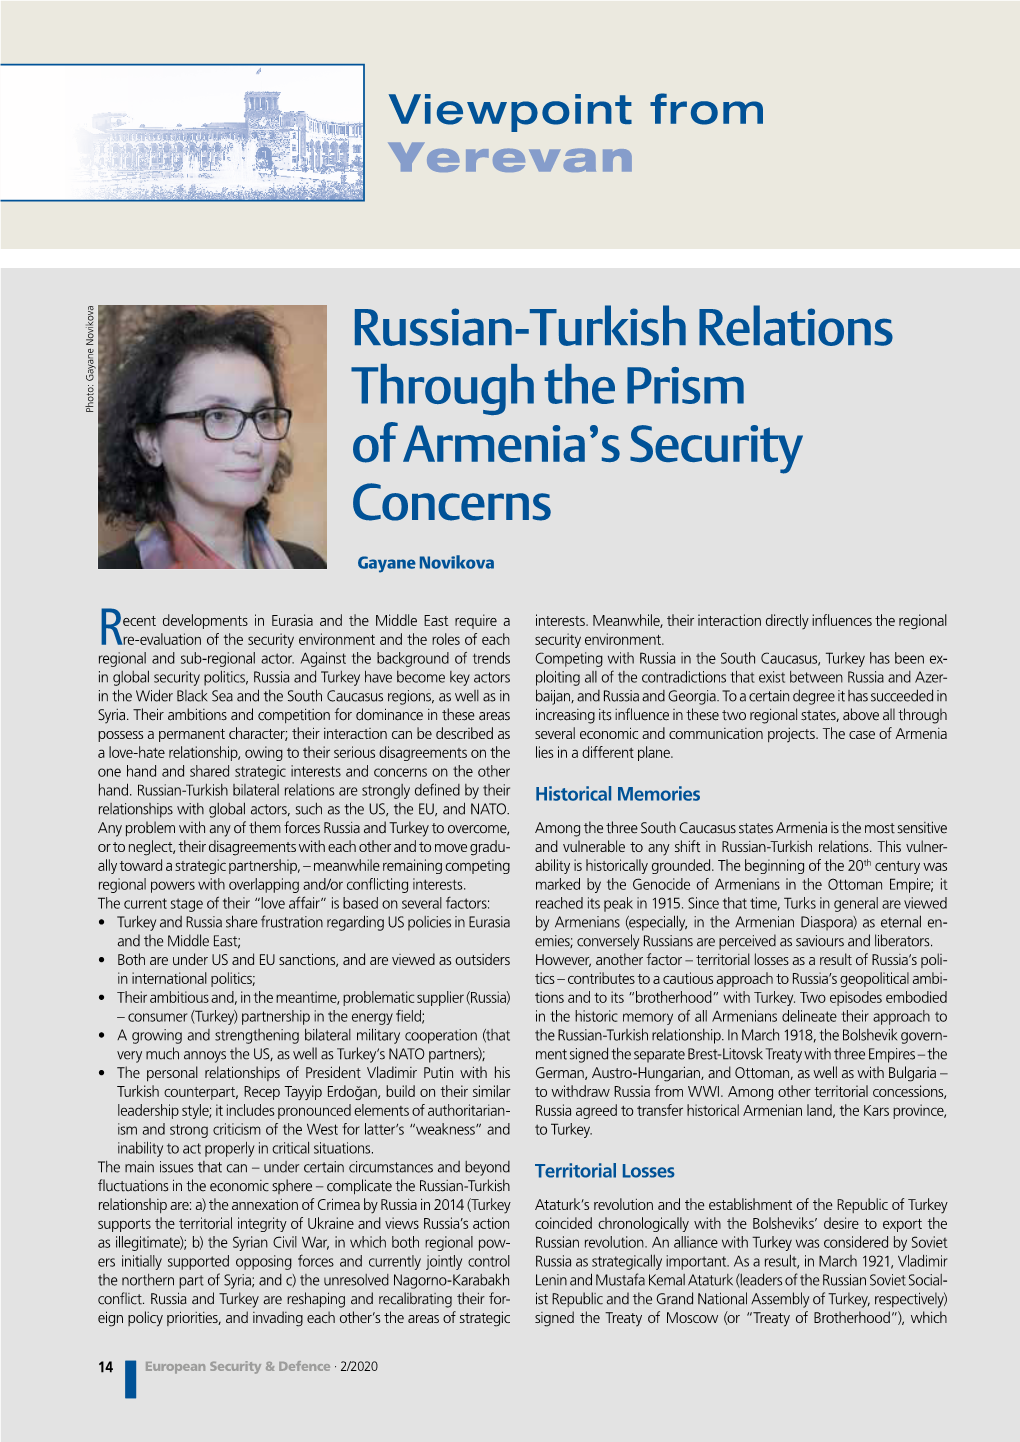 Russian-Turkish Relations Through the Prism of Armenia's Security